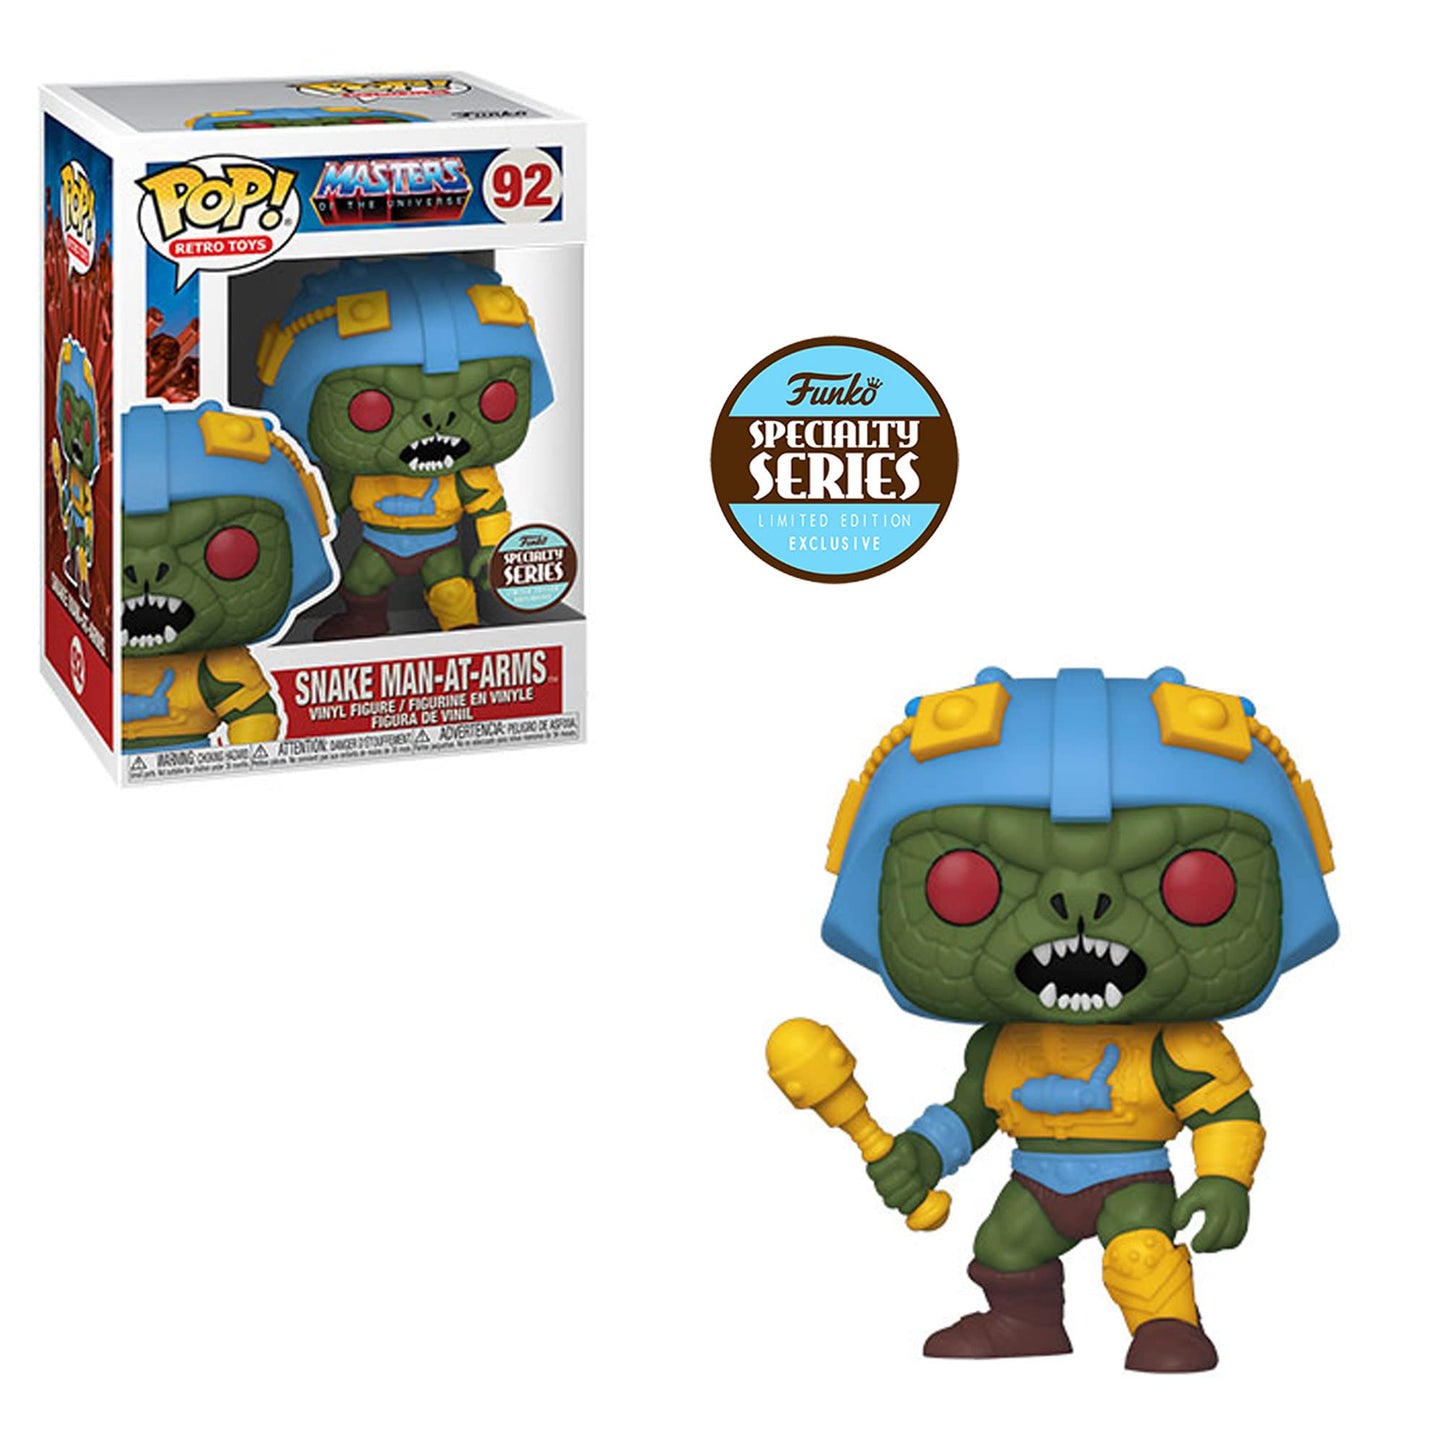 Funko POP! Retro Toys Masters of the Universe Snake Man-at-Arms #92 Specialty Series Exclusive